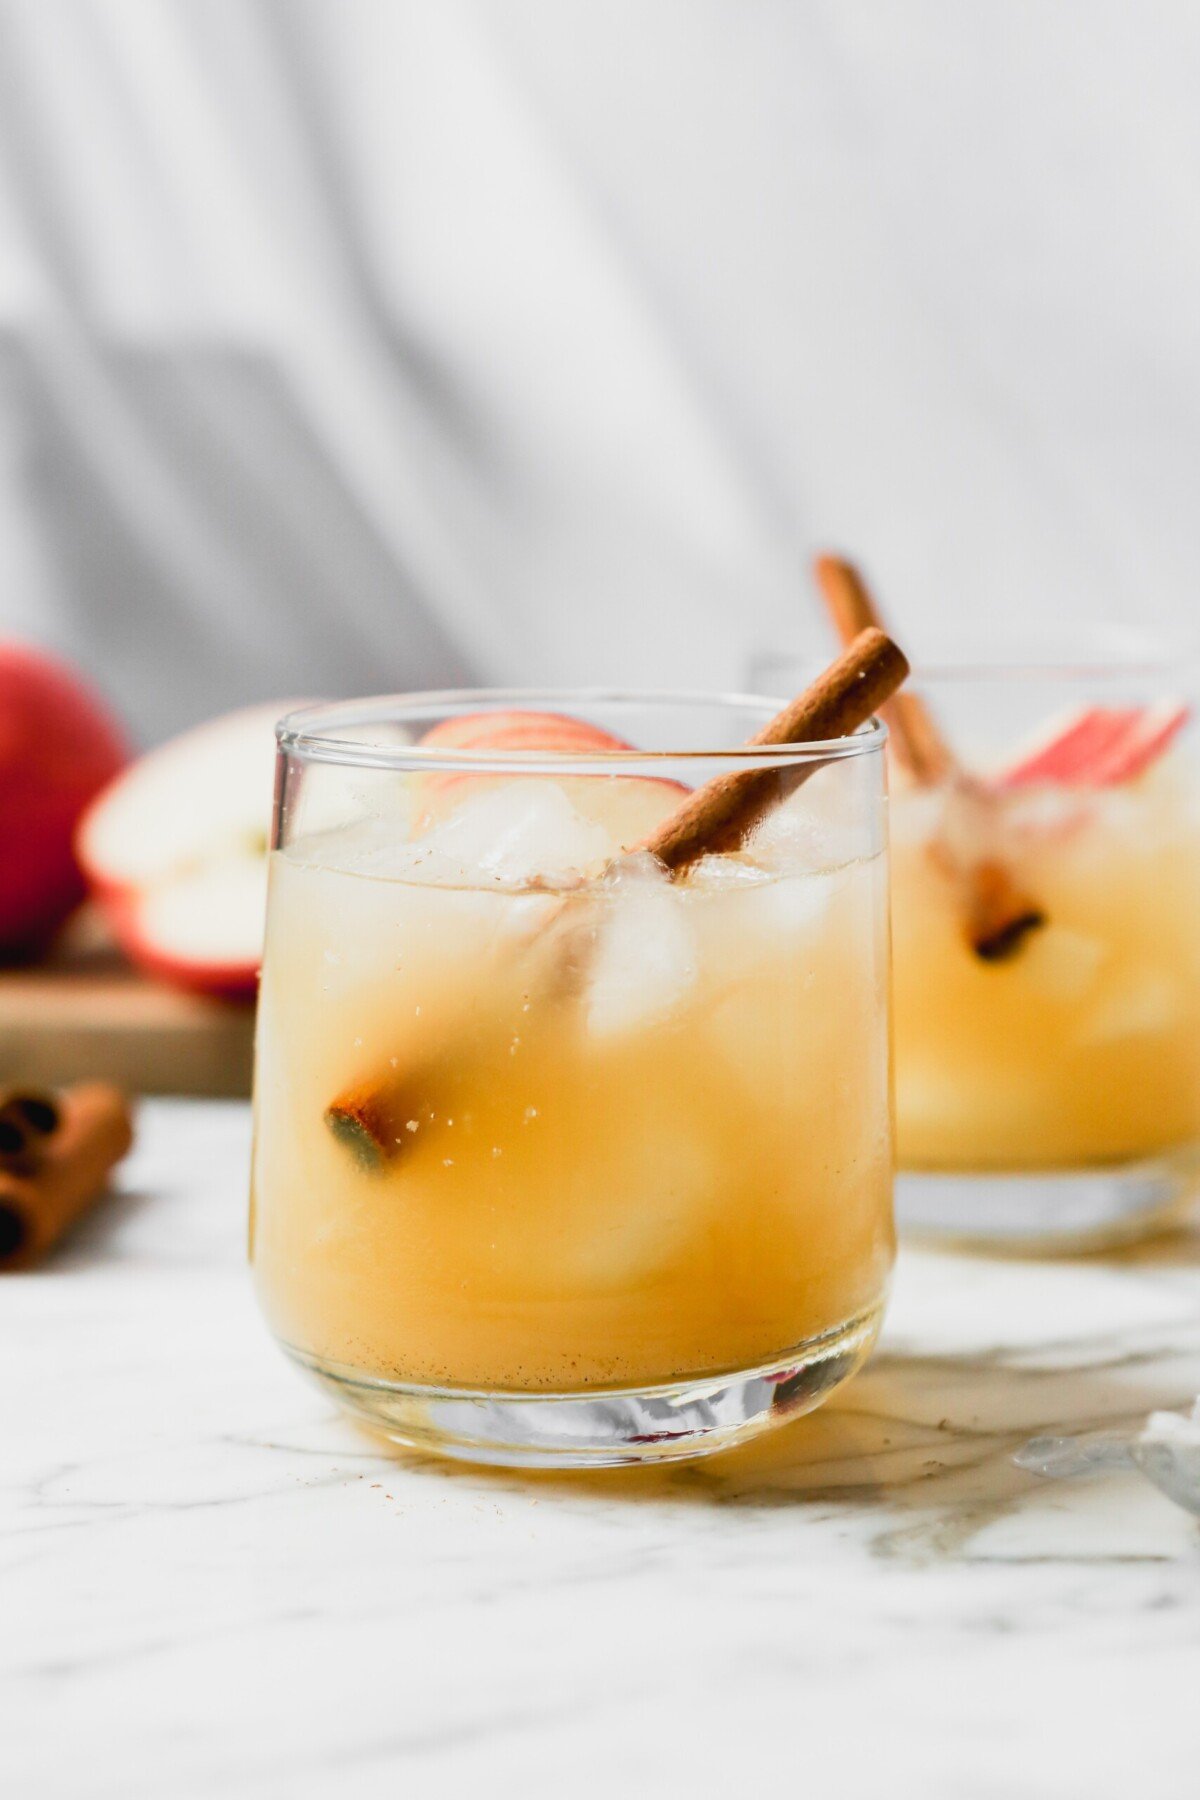 Apple bourbon cocktail on a white marble surface garnished with apple slices and cinnamon stick